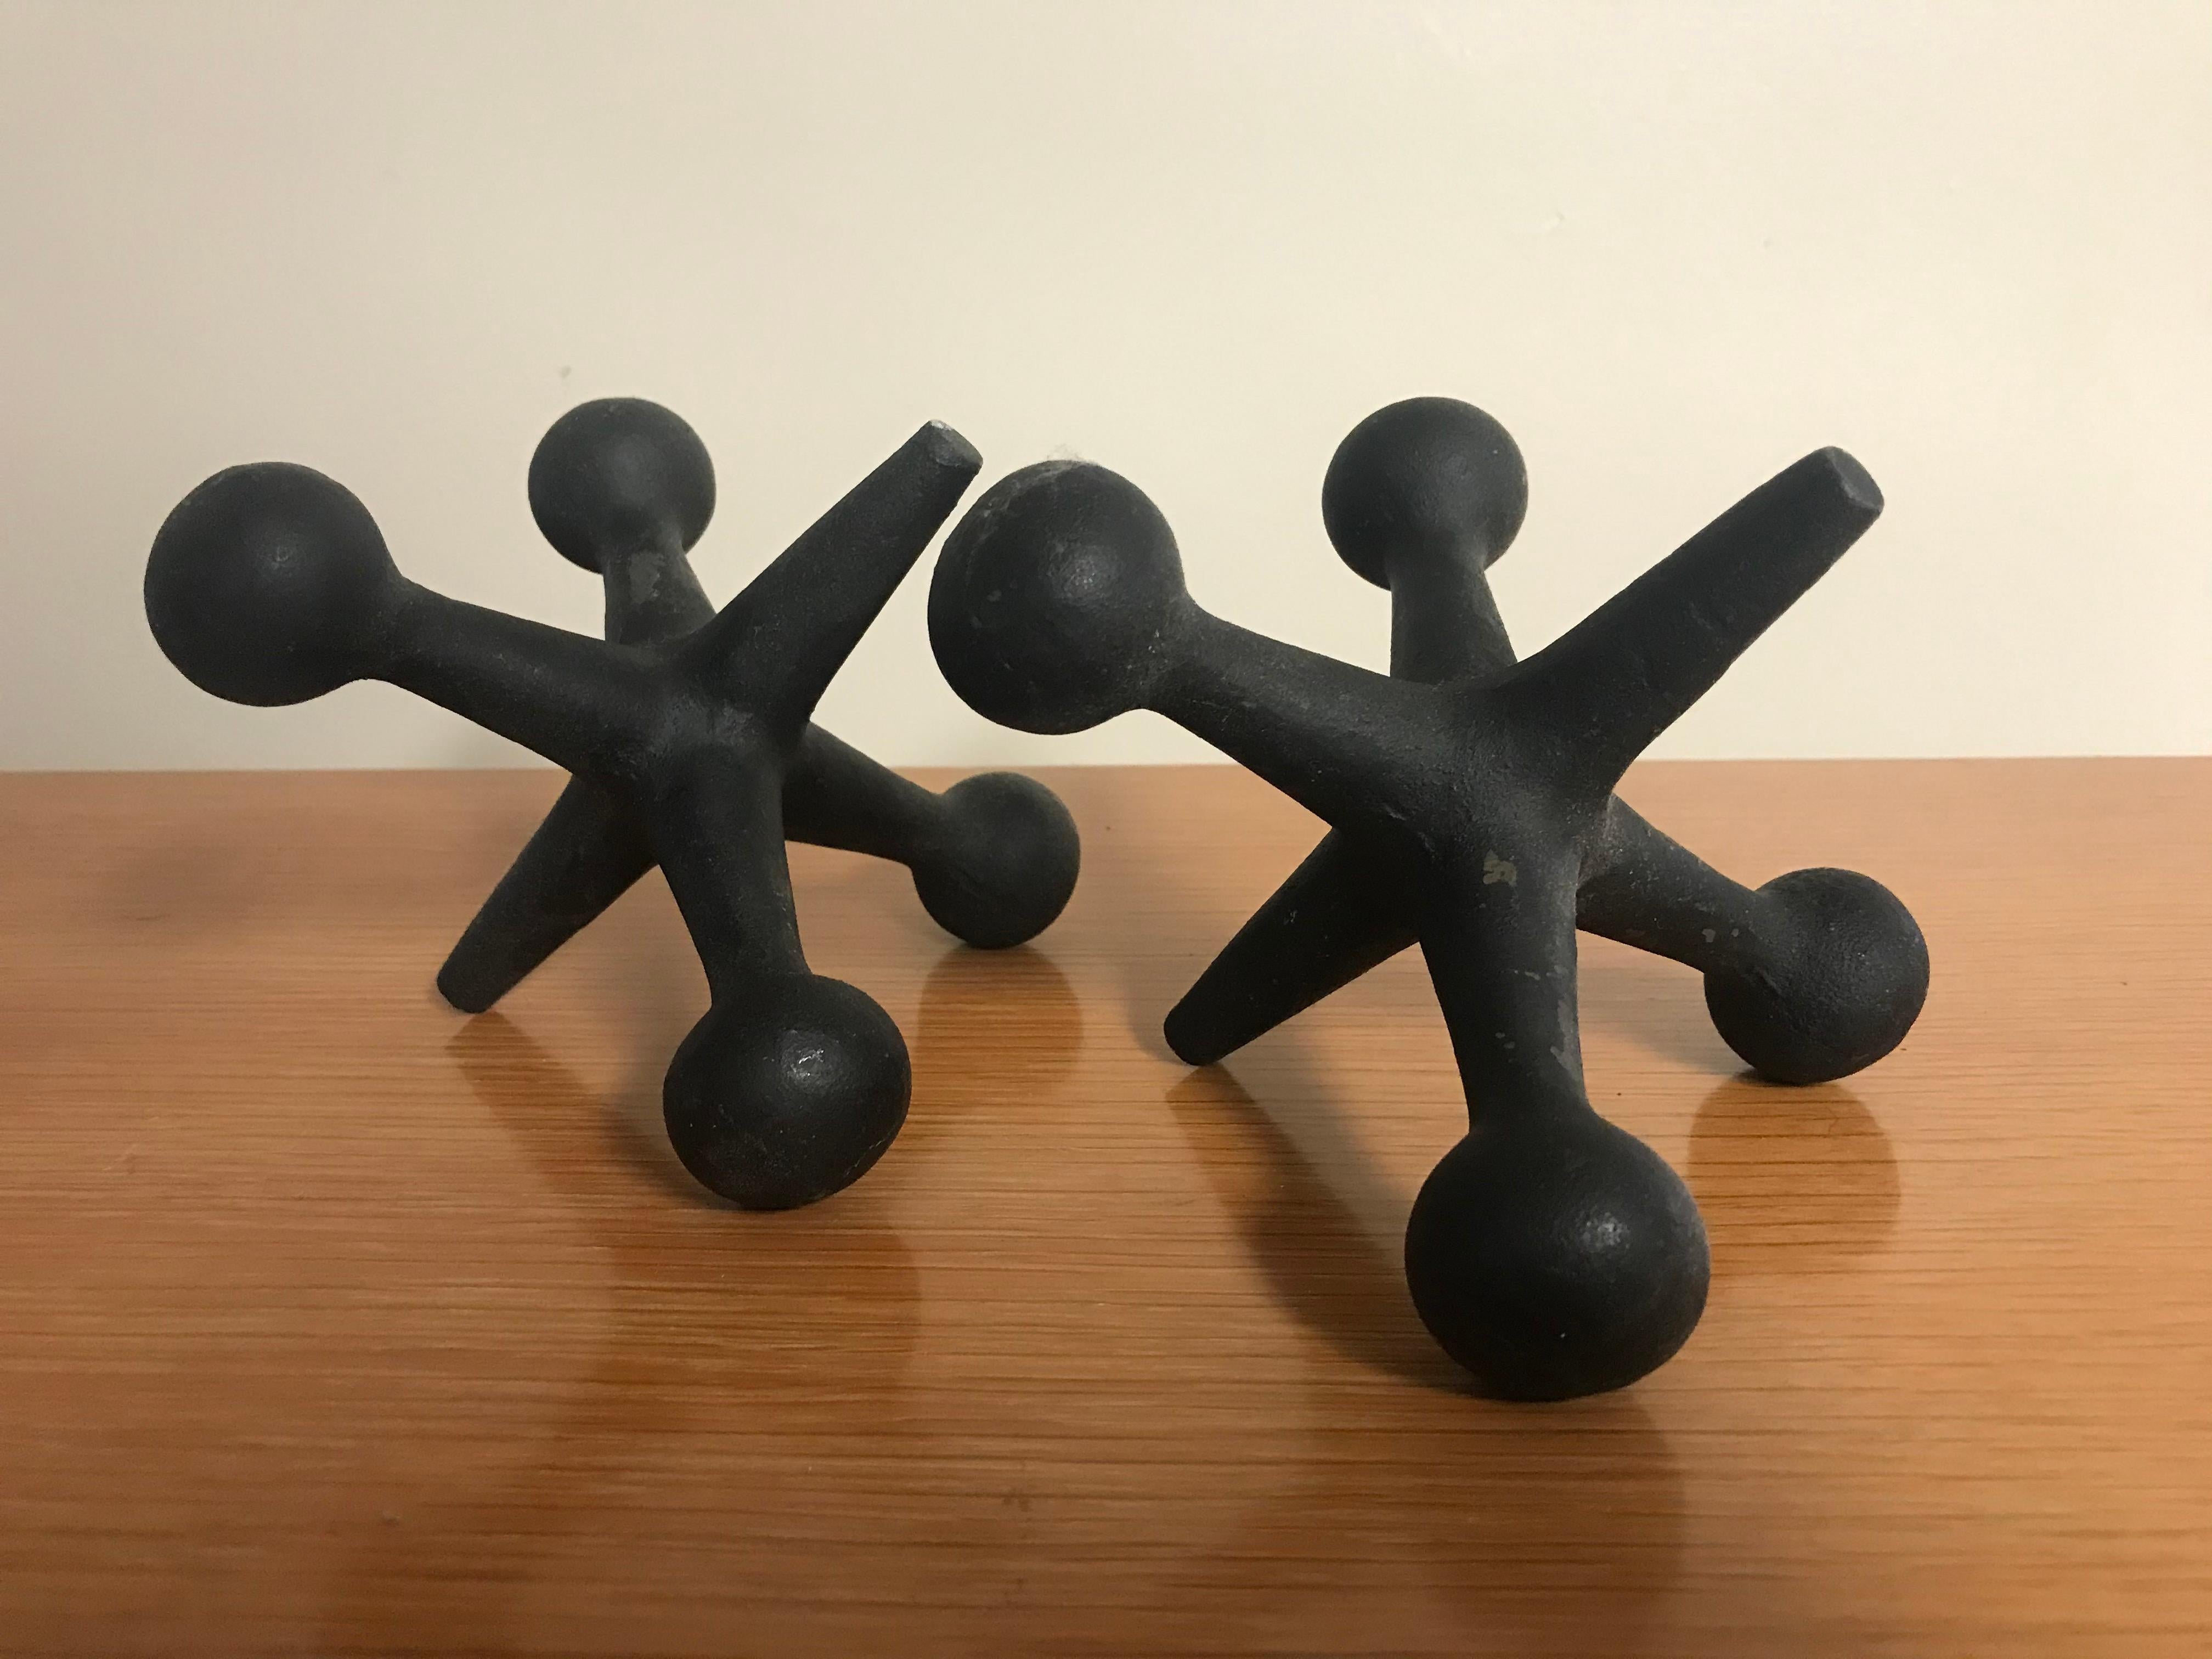 Pair of Black Iron Pop Art 1960s Jacks Bookends by Bill Curry for Design Line 5